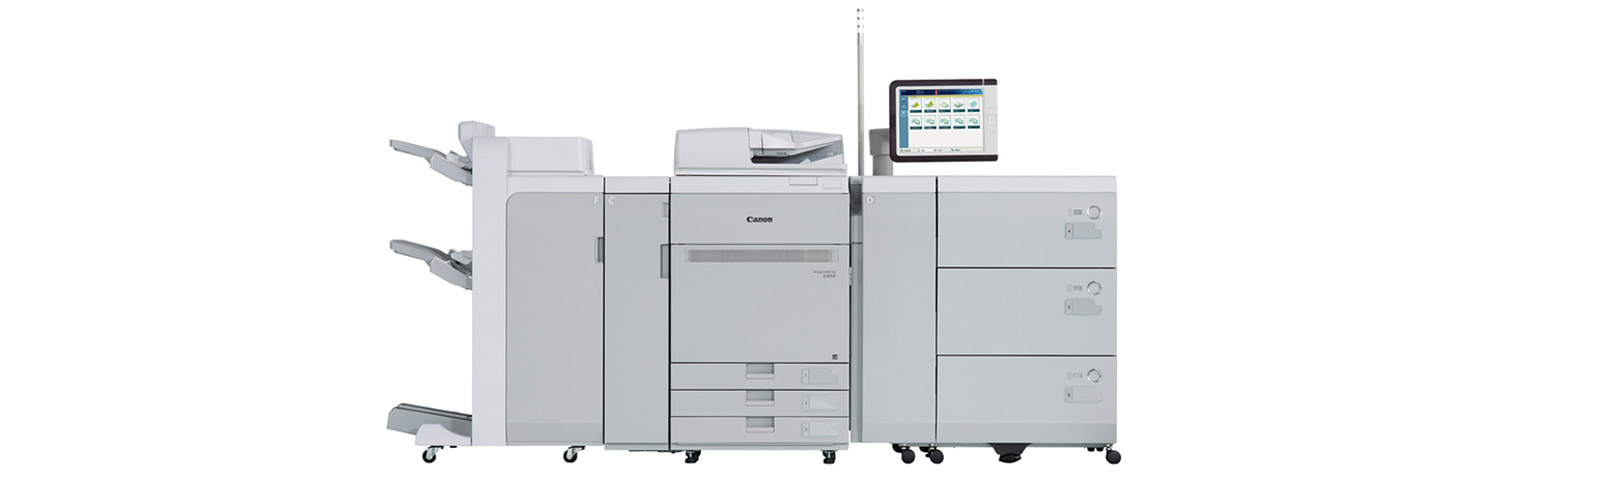 Canon imagePRESS C750 Production Print System